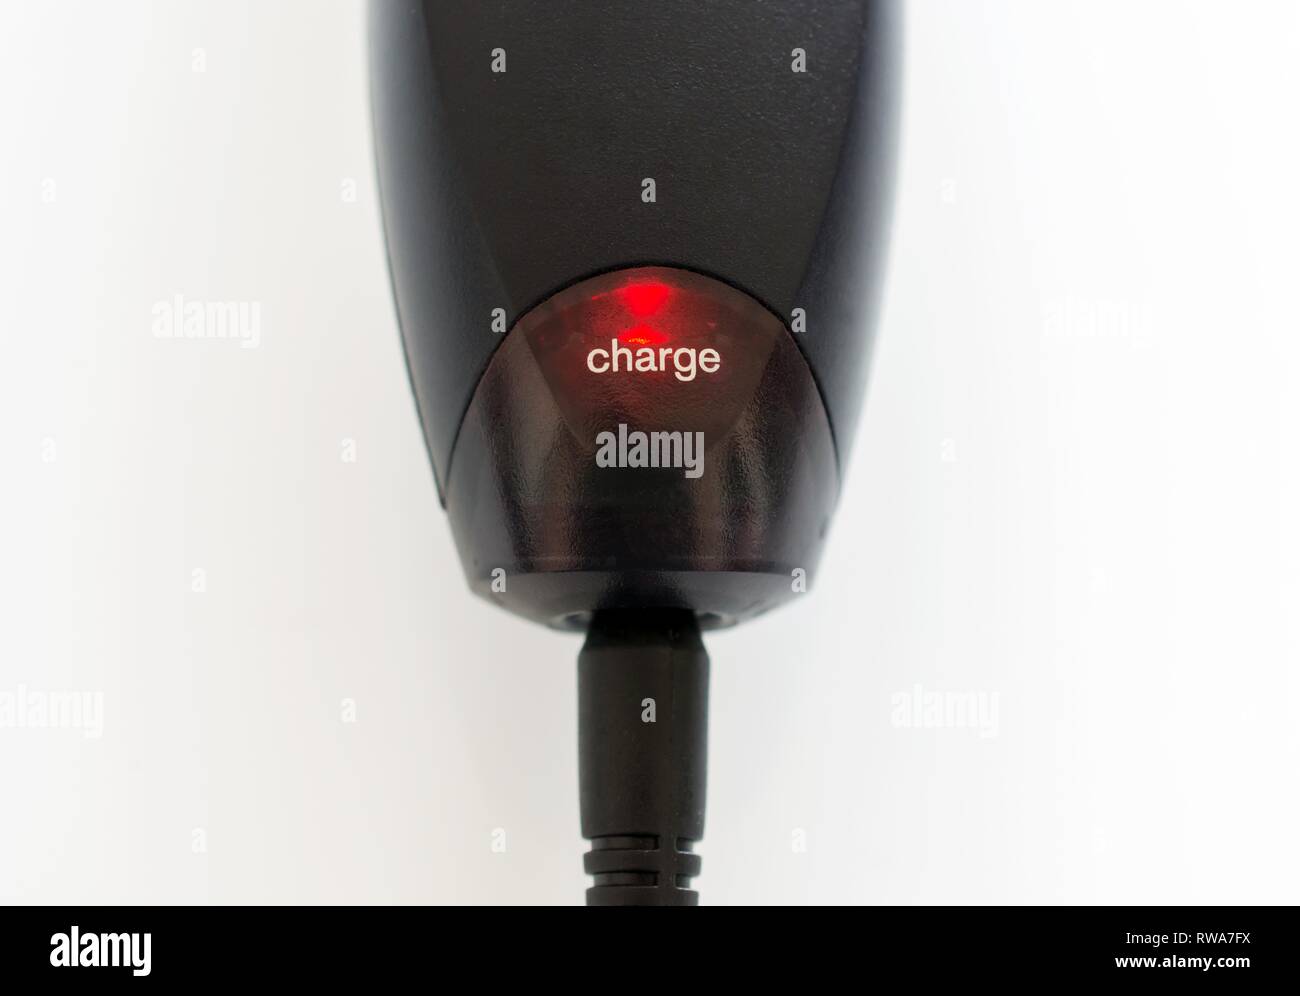 Electrical device is charging, glows red, Germany Stock Photo